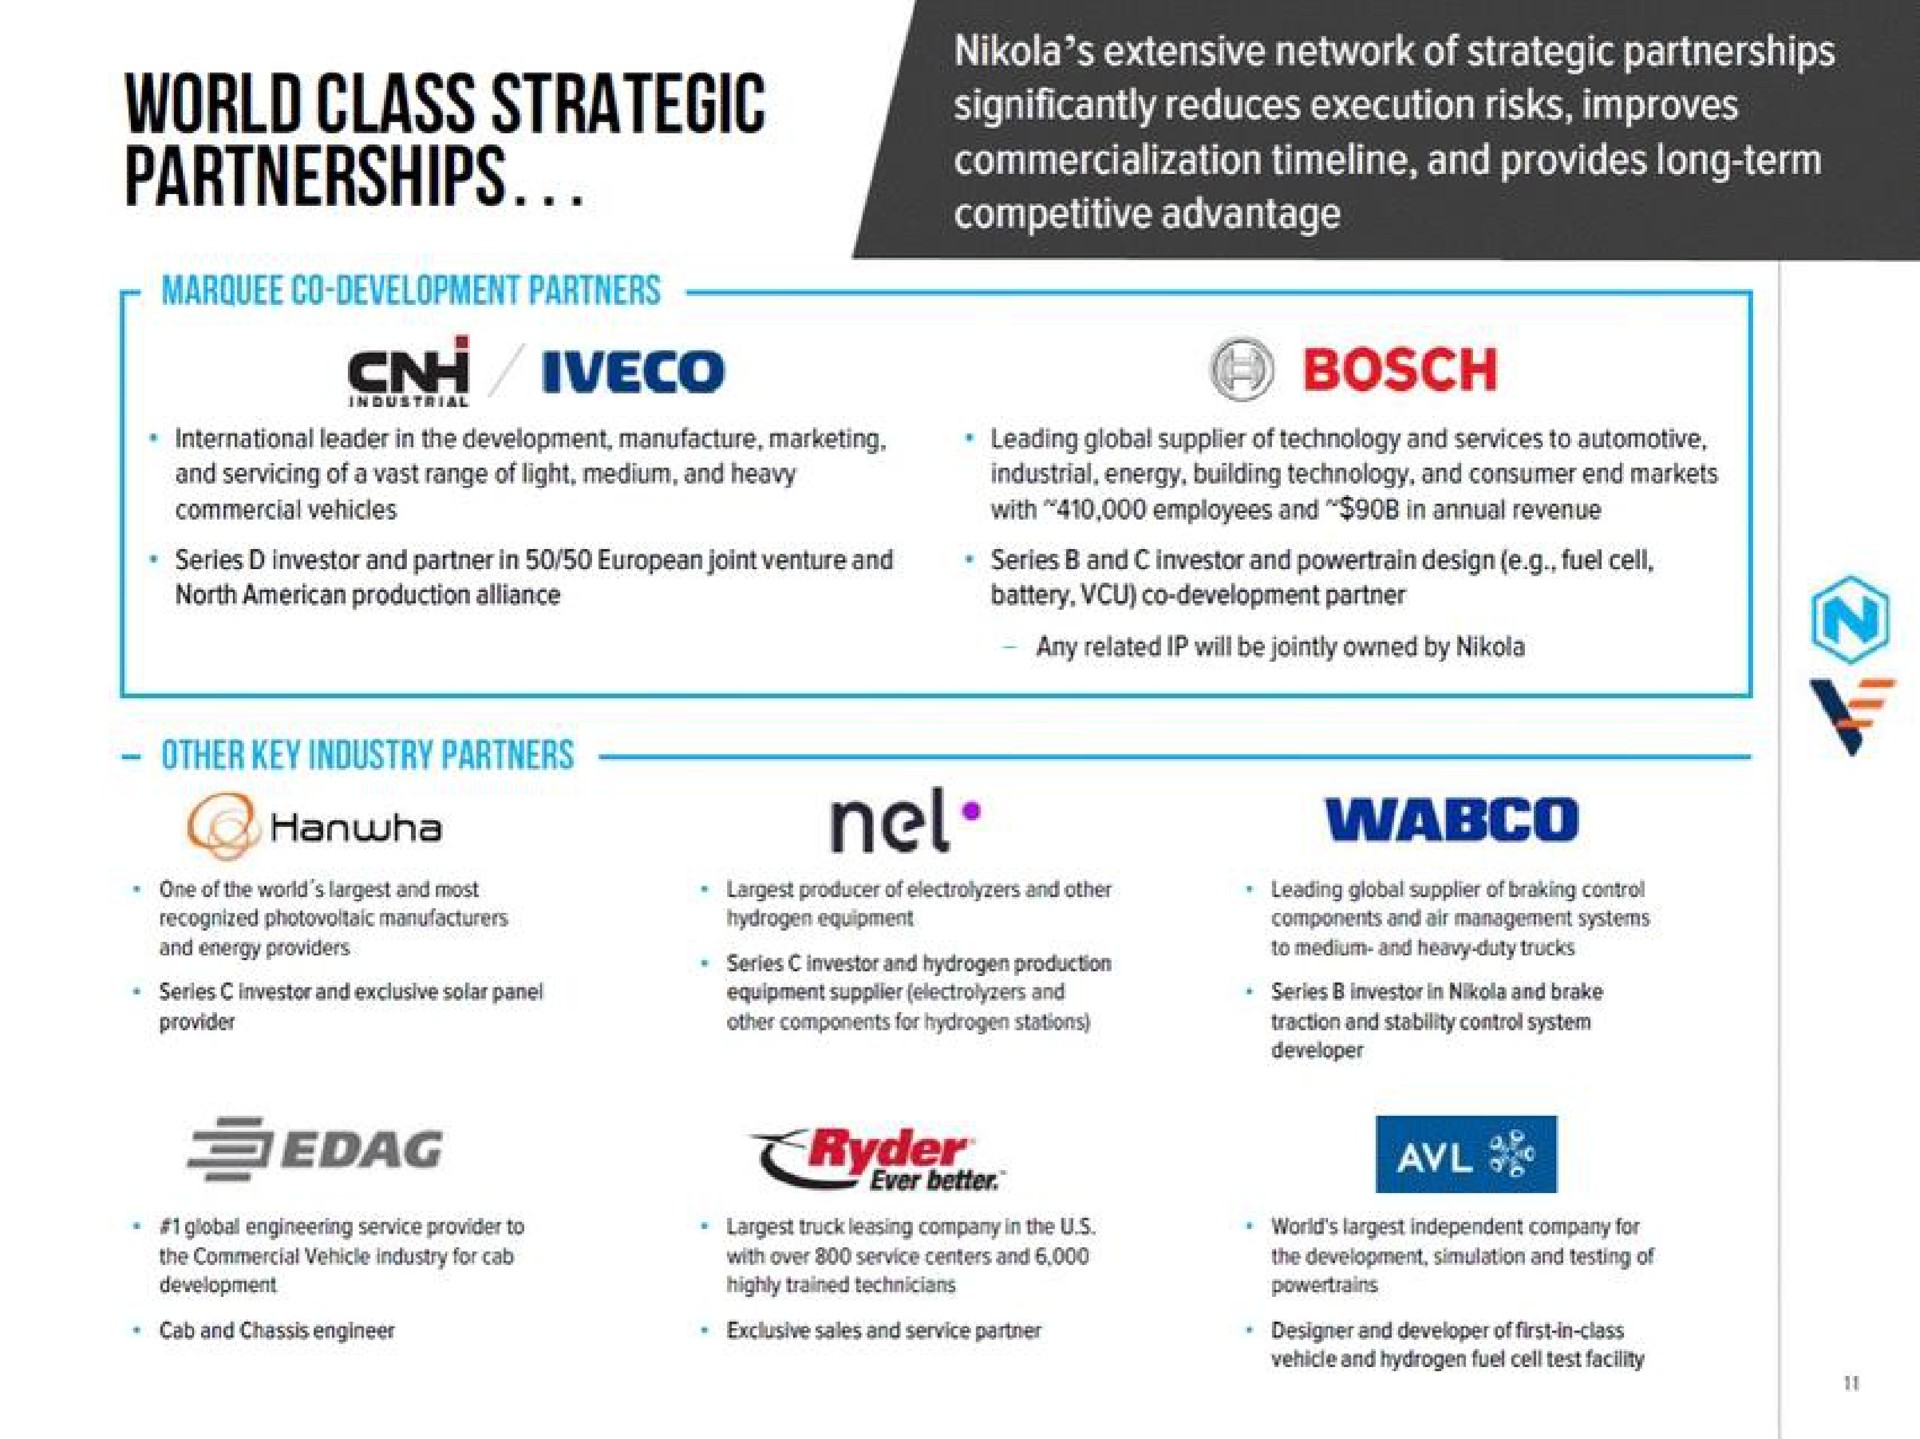 world class strategic marquee development partners significantly reduces execution risks improves bosch | Nikola